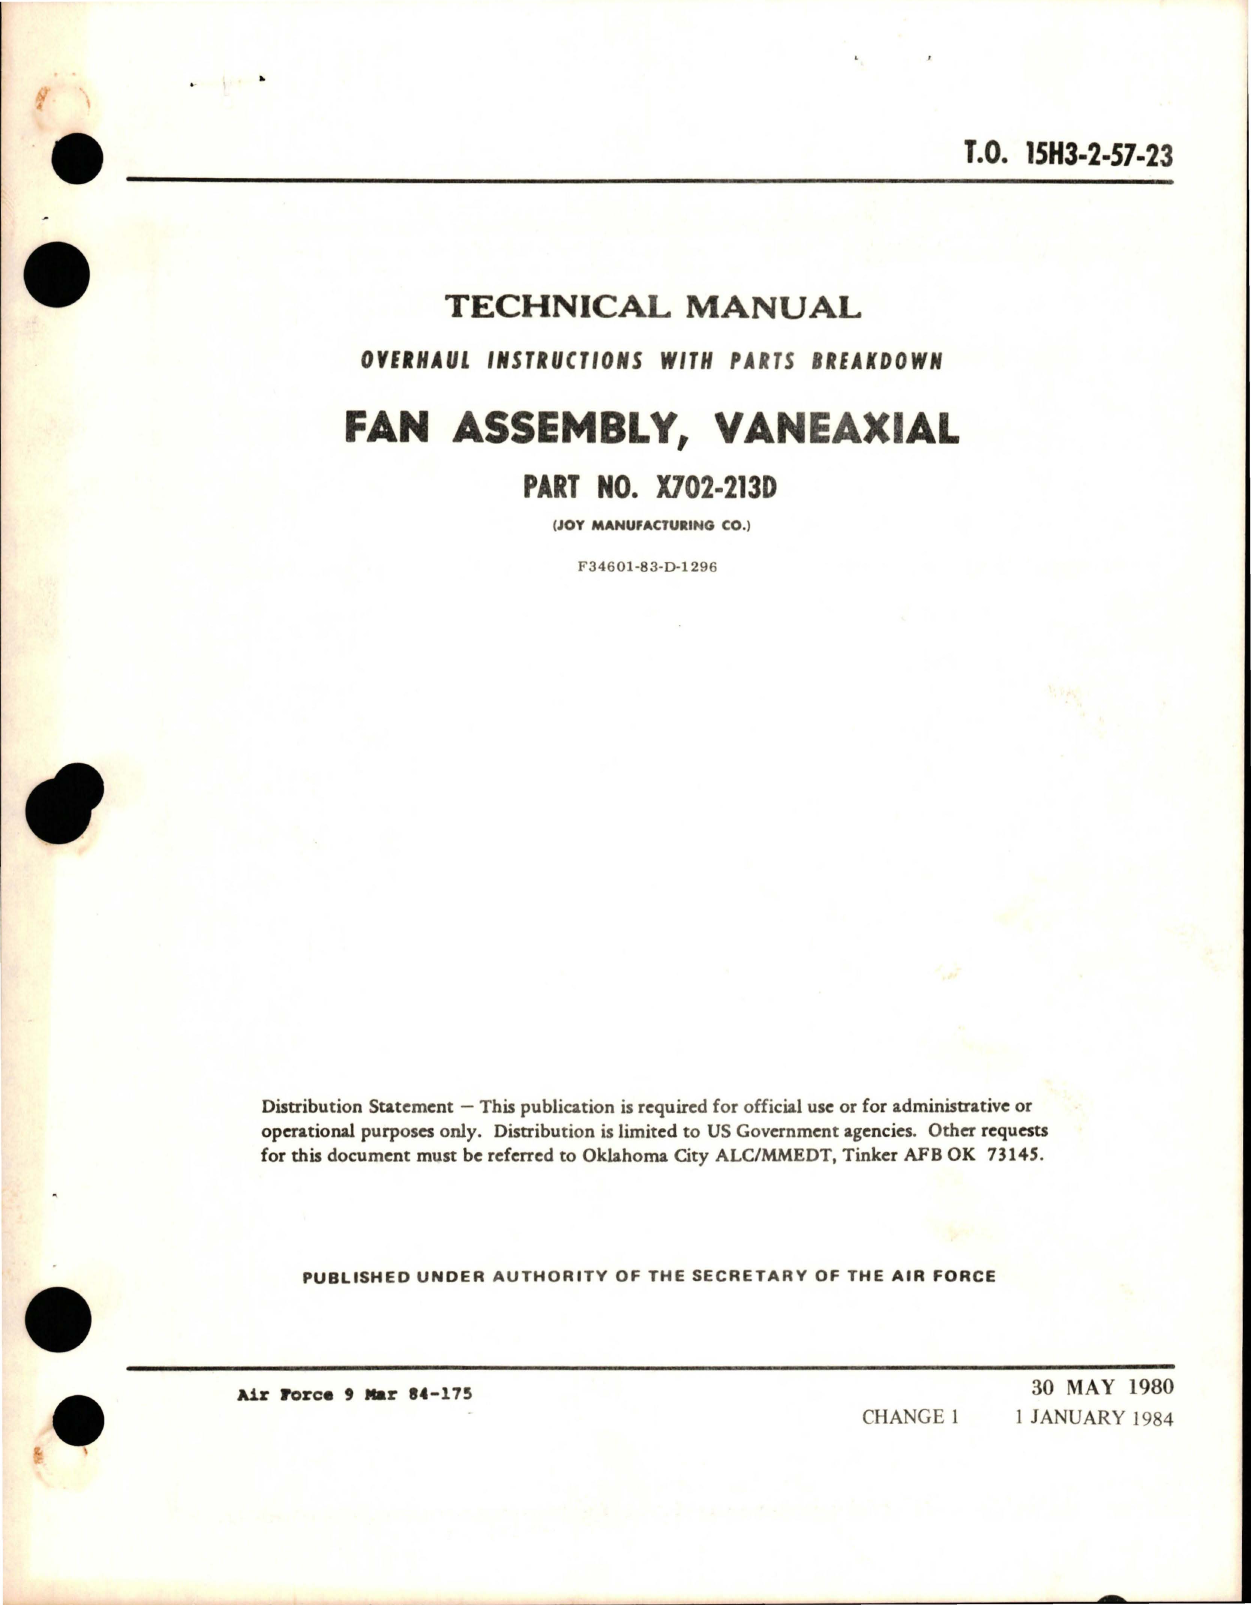 Sample page 1 from AirCorps Library document: Overhaul Instructions with Parts for Vaneaxial Fan Assembly - Part X702-213D